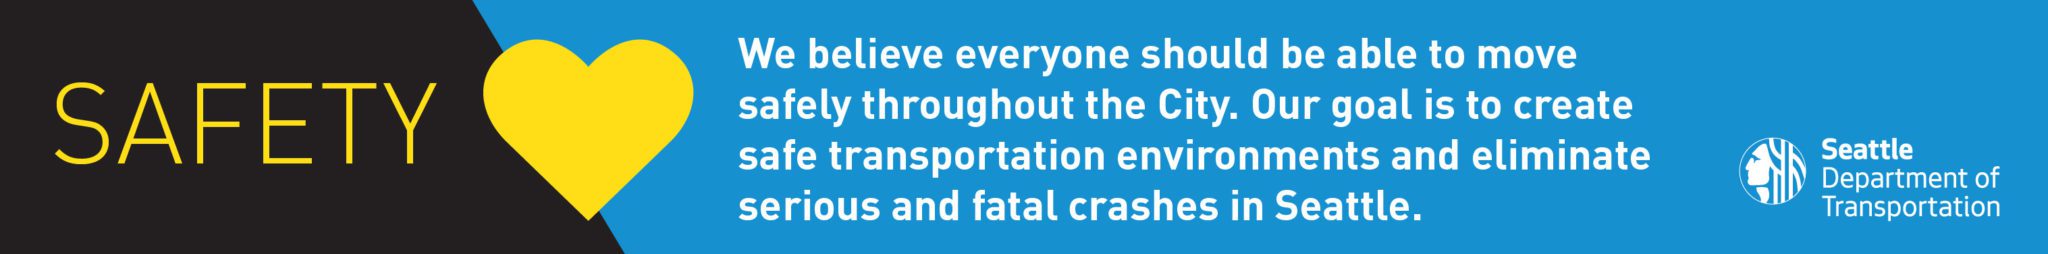 Safety is also one of SDOT's core values and goals.